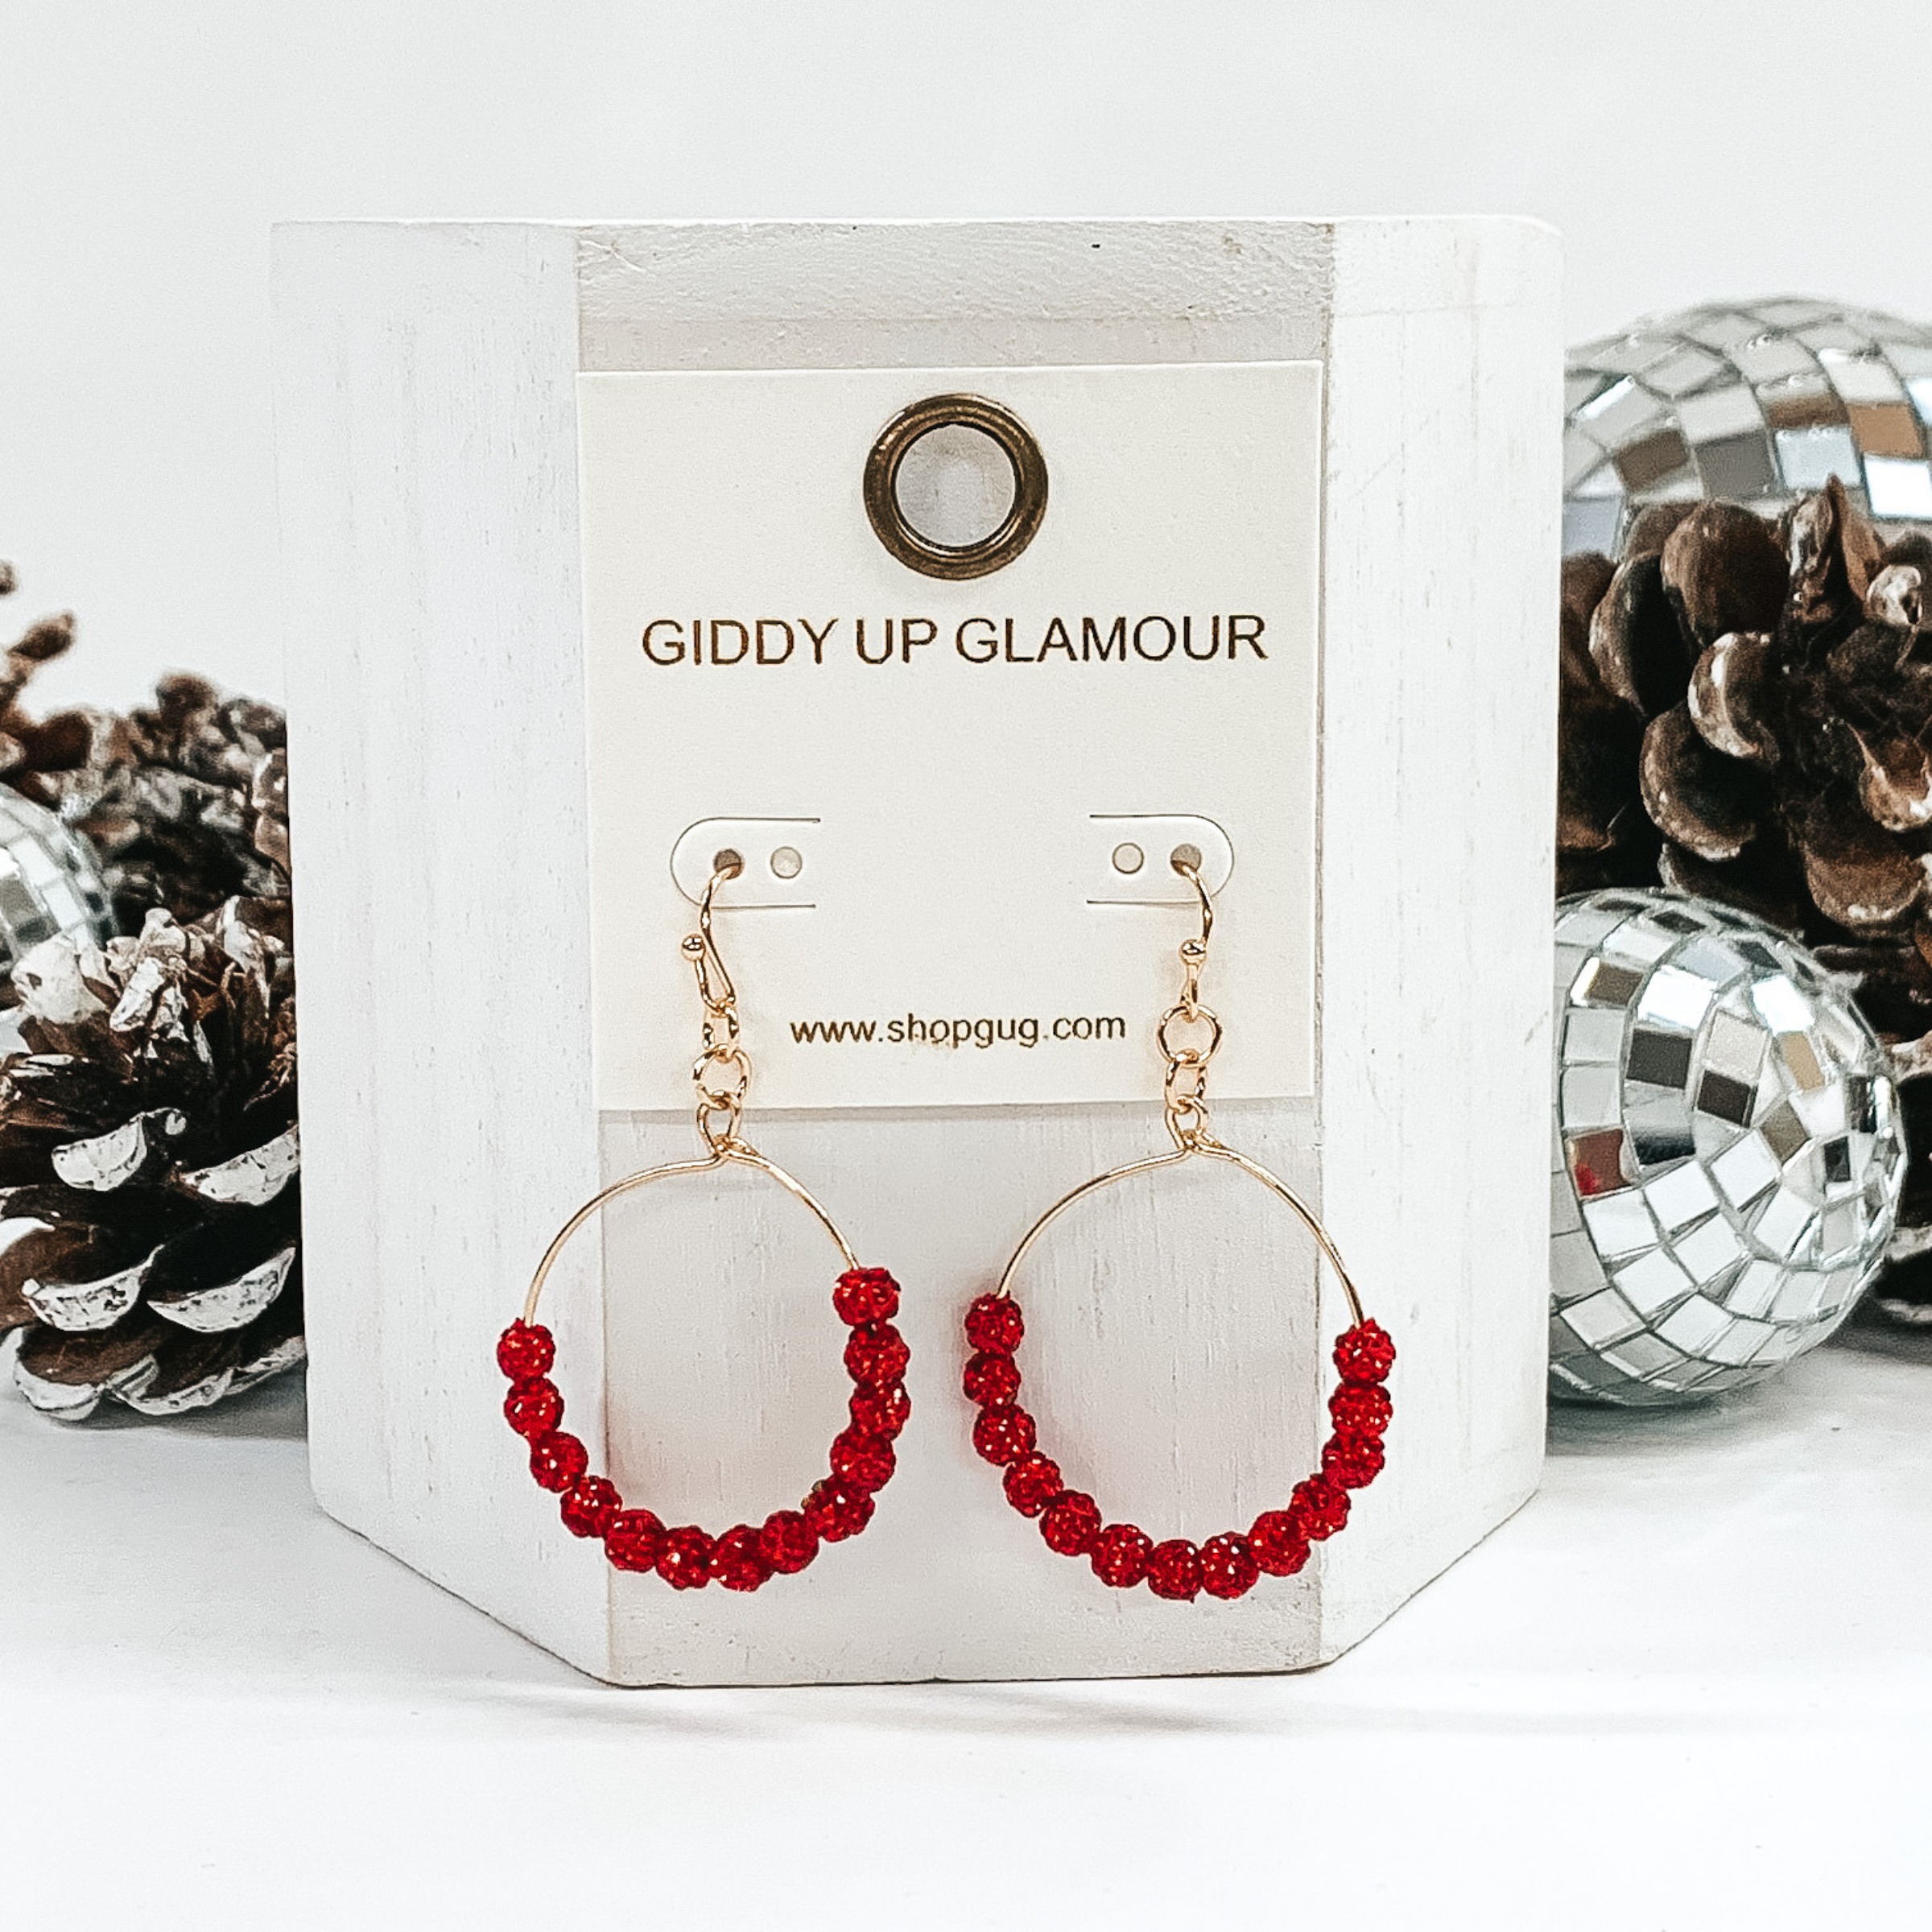 Elf Size Earrings in Sparkly Red - Giddy Up Glamour Boutique